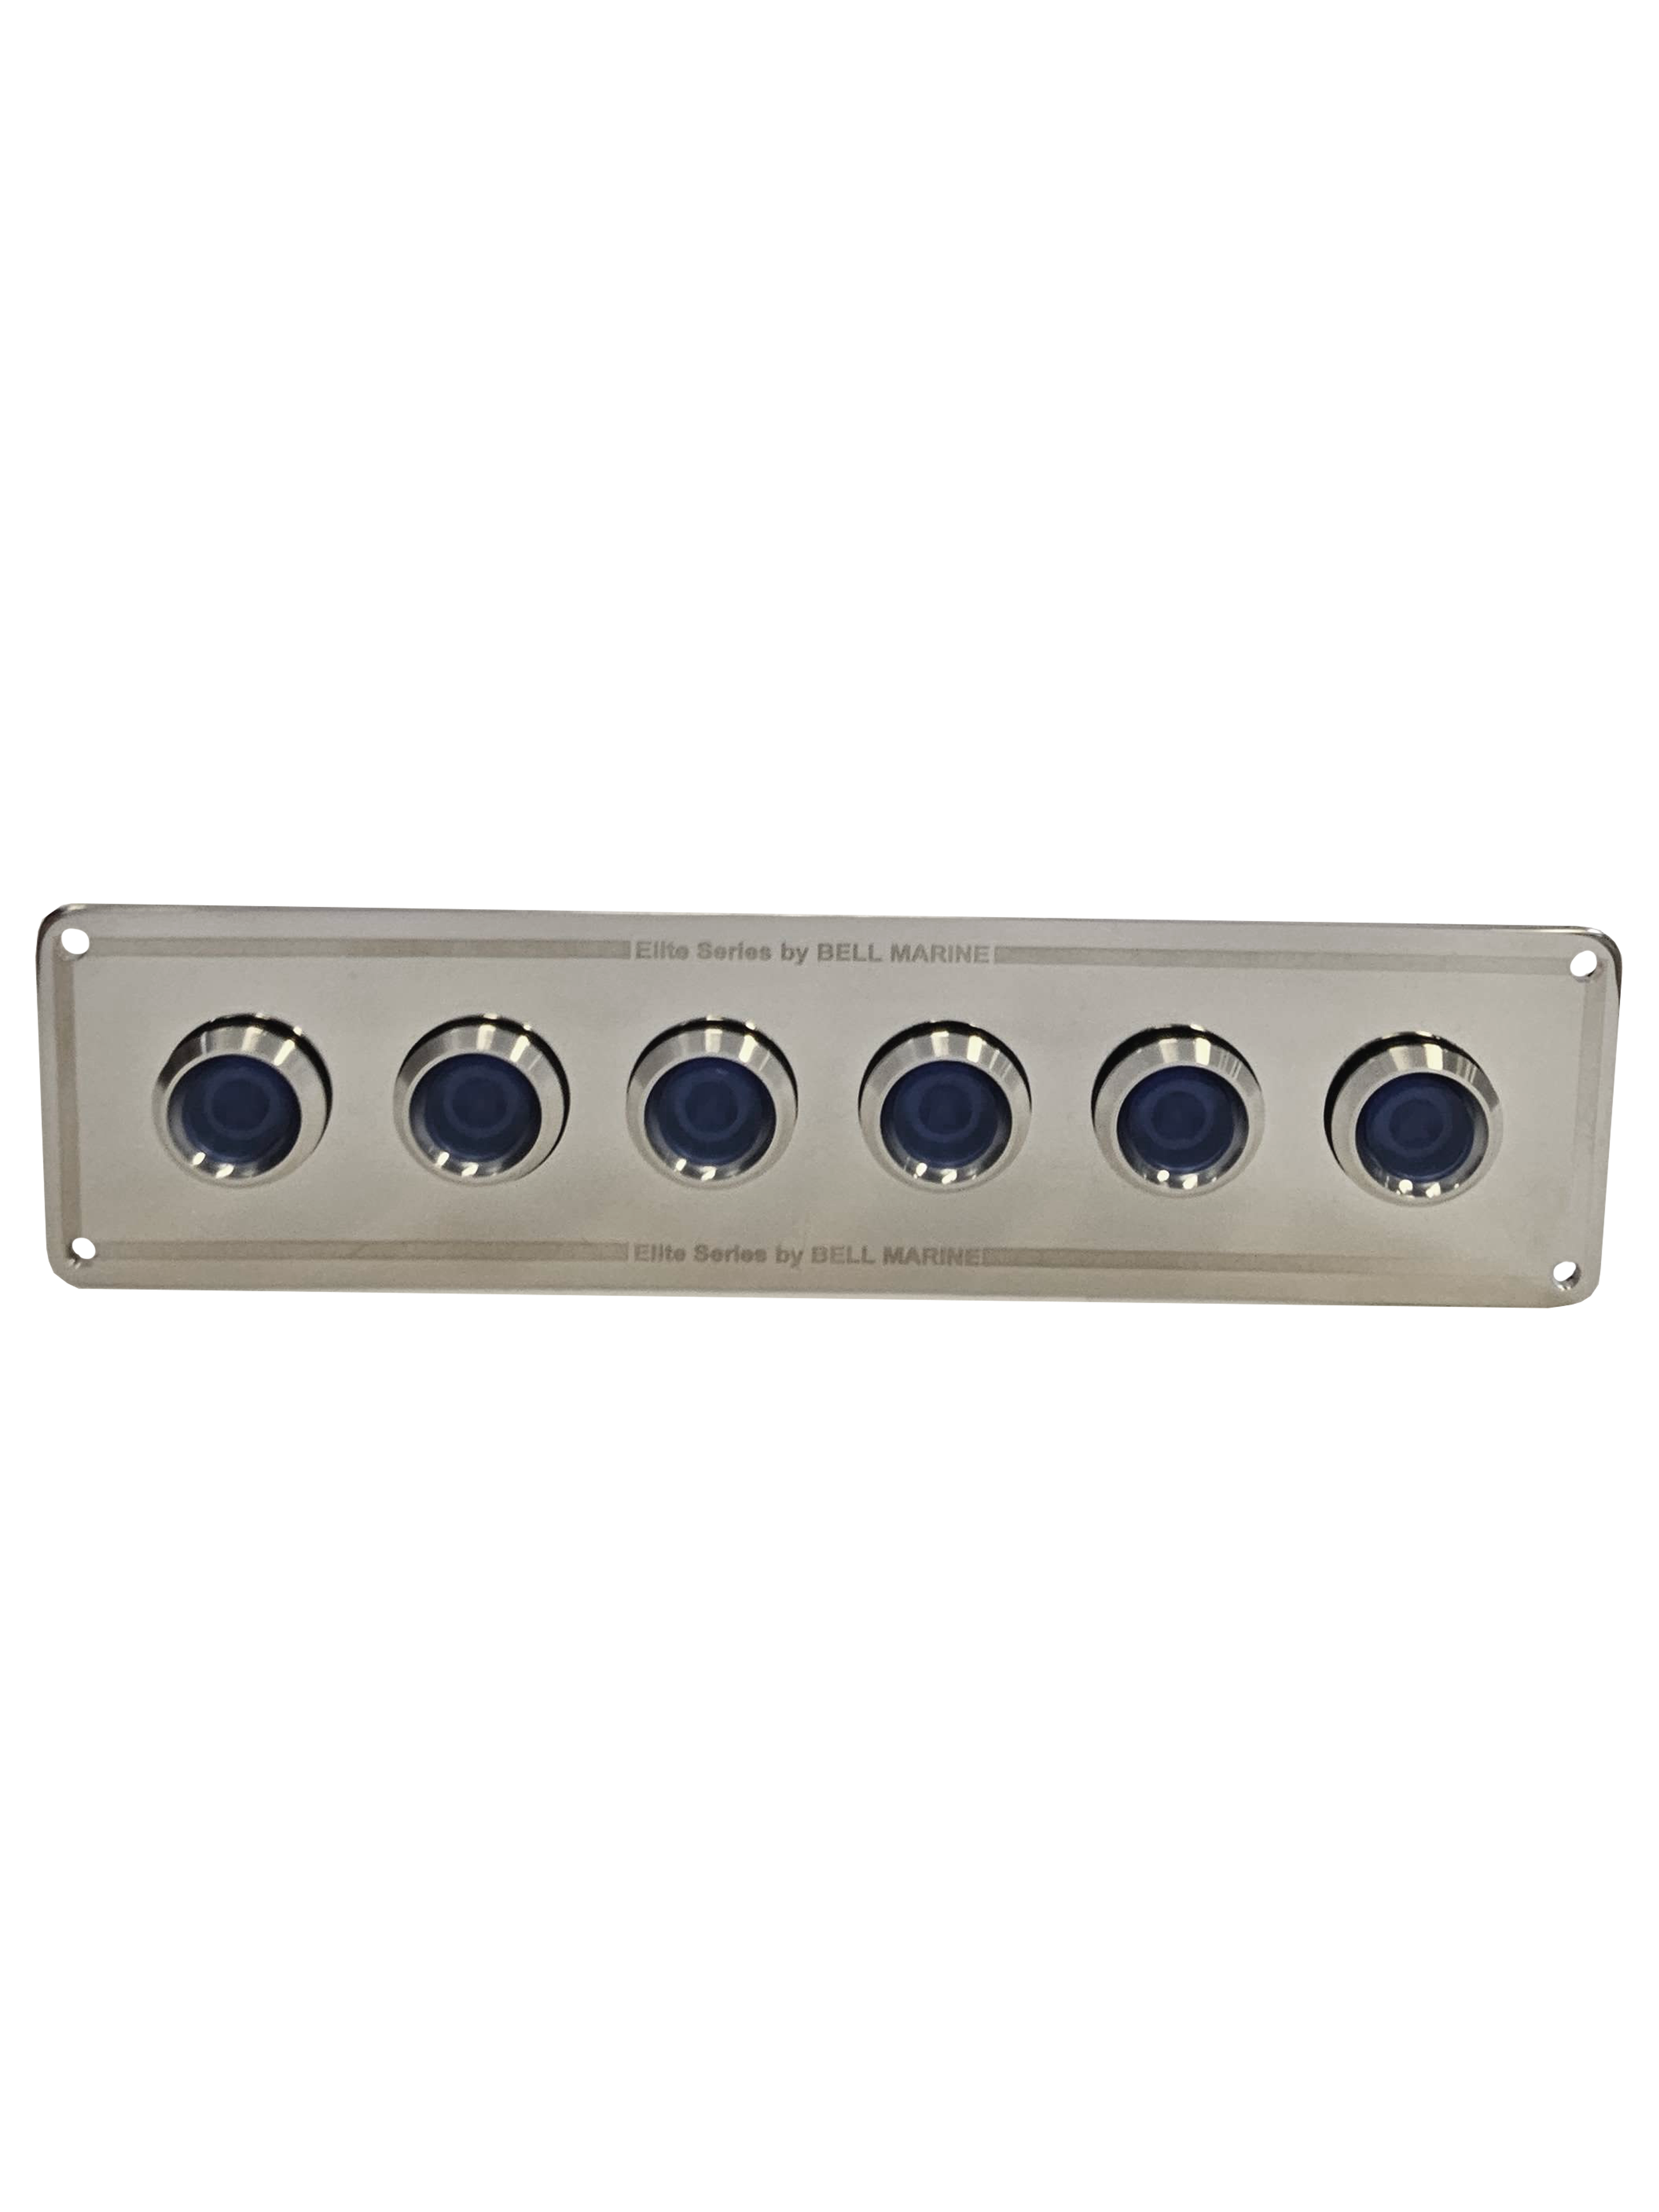 6 gang INLINE stainless steel switch panel with 15A backlit switches